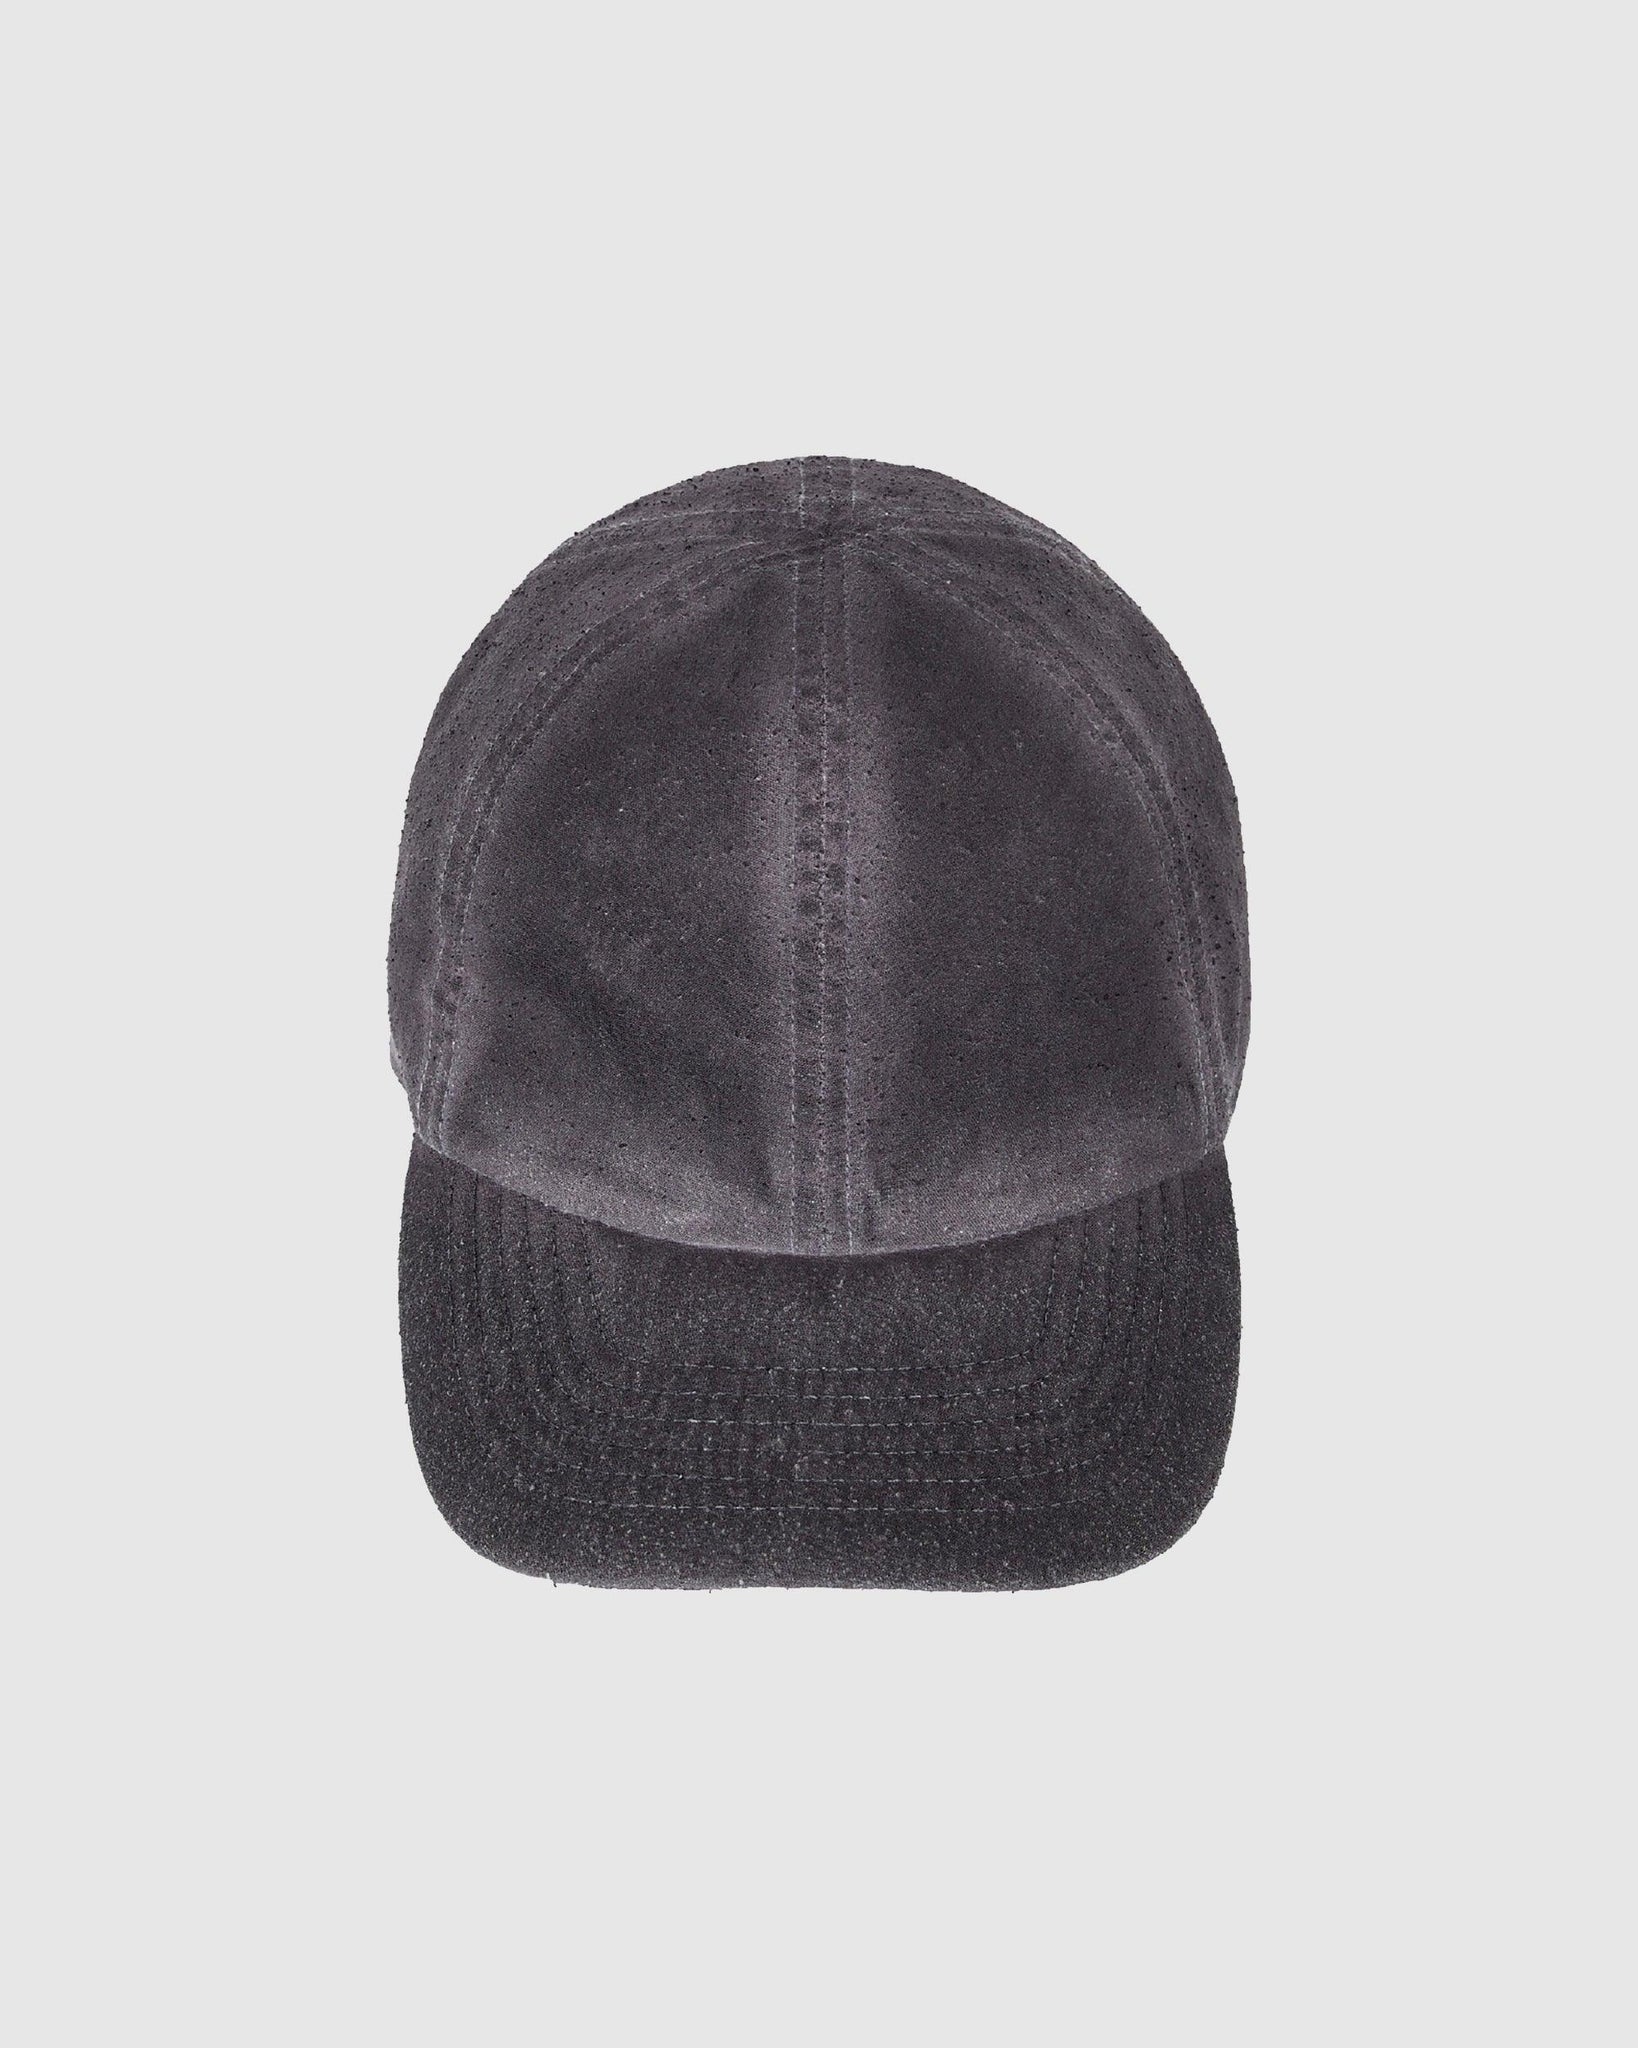 Purple EP.3 01 Cap - {{ collection.title }} - Chinatown Country Club 